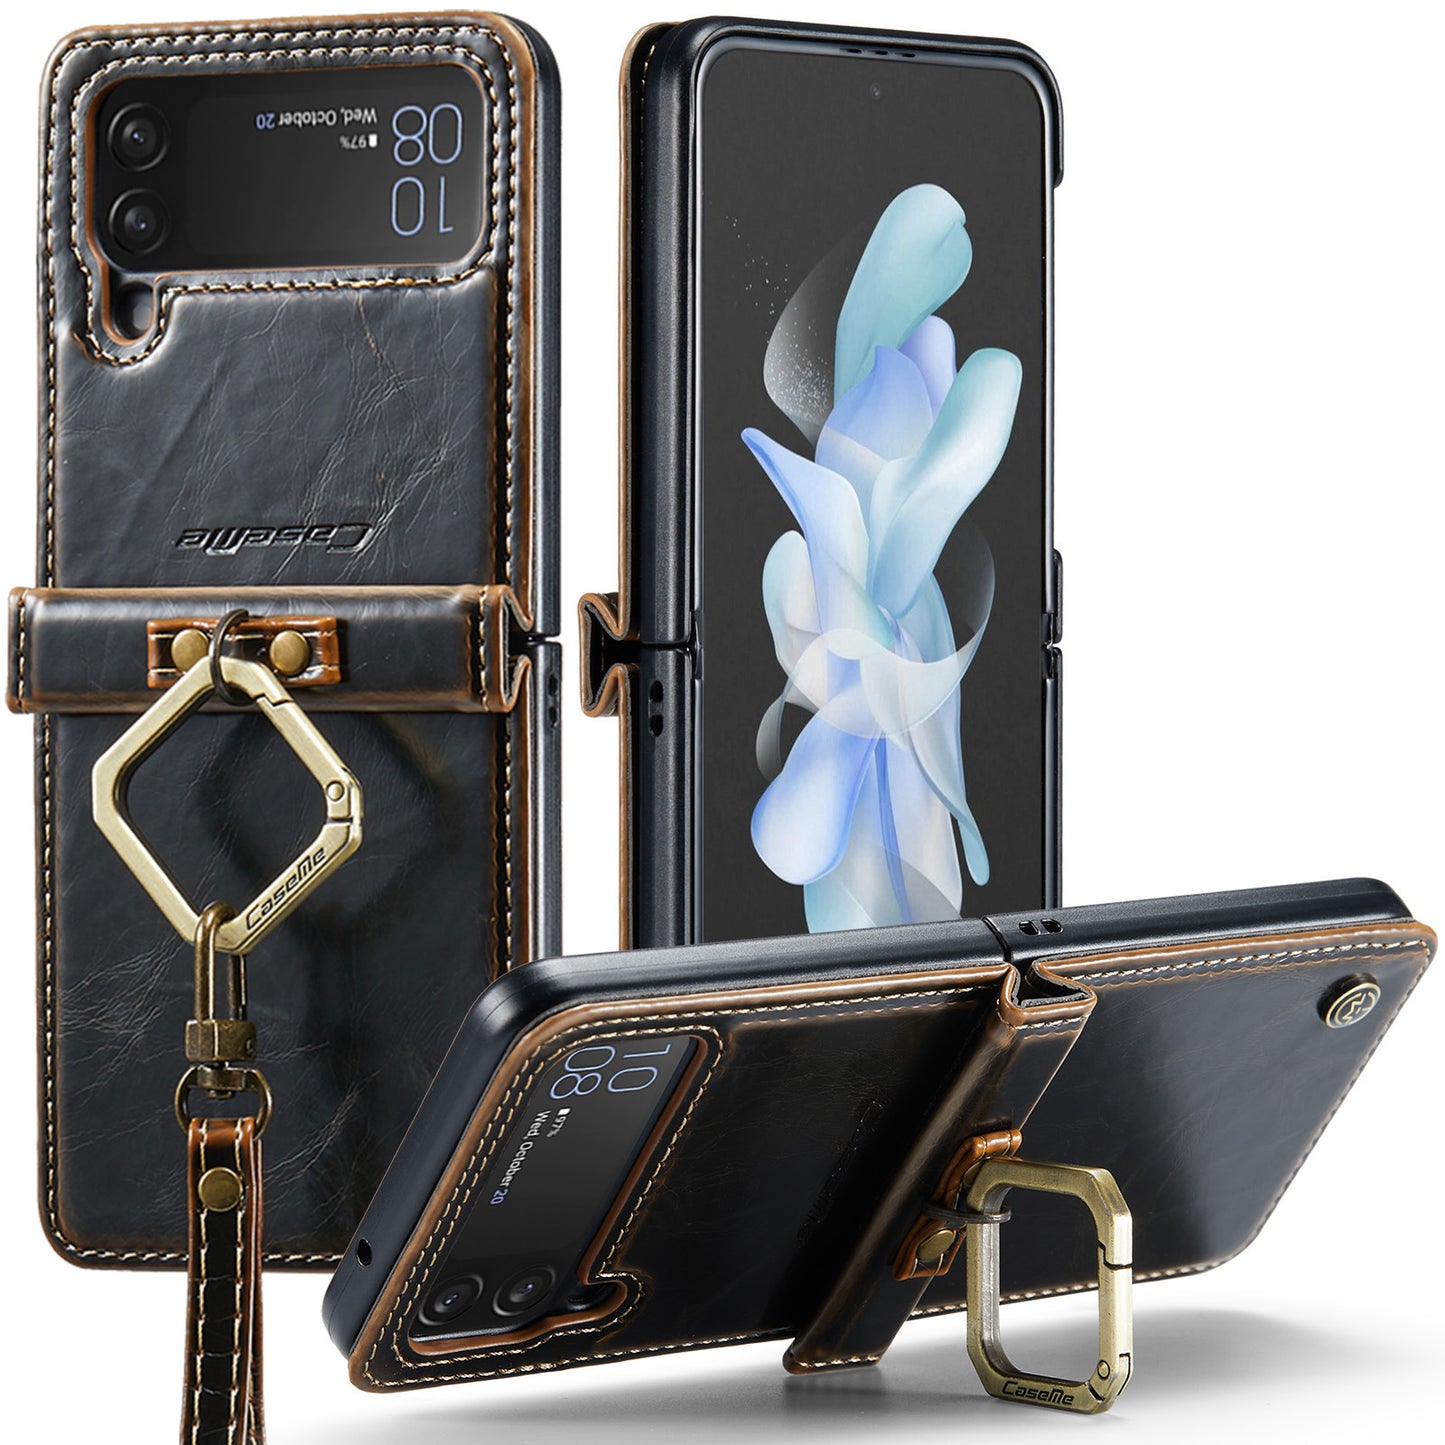 Leather Case For Samsung Galaxy Z Flip4 5G with Hand Strap and Keychain